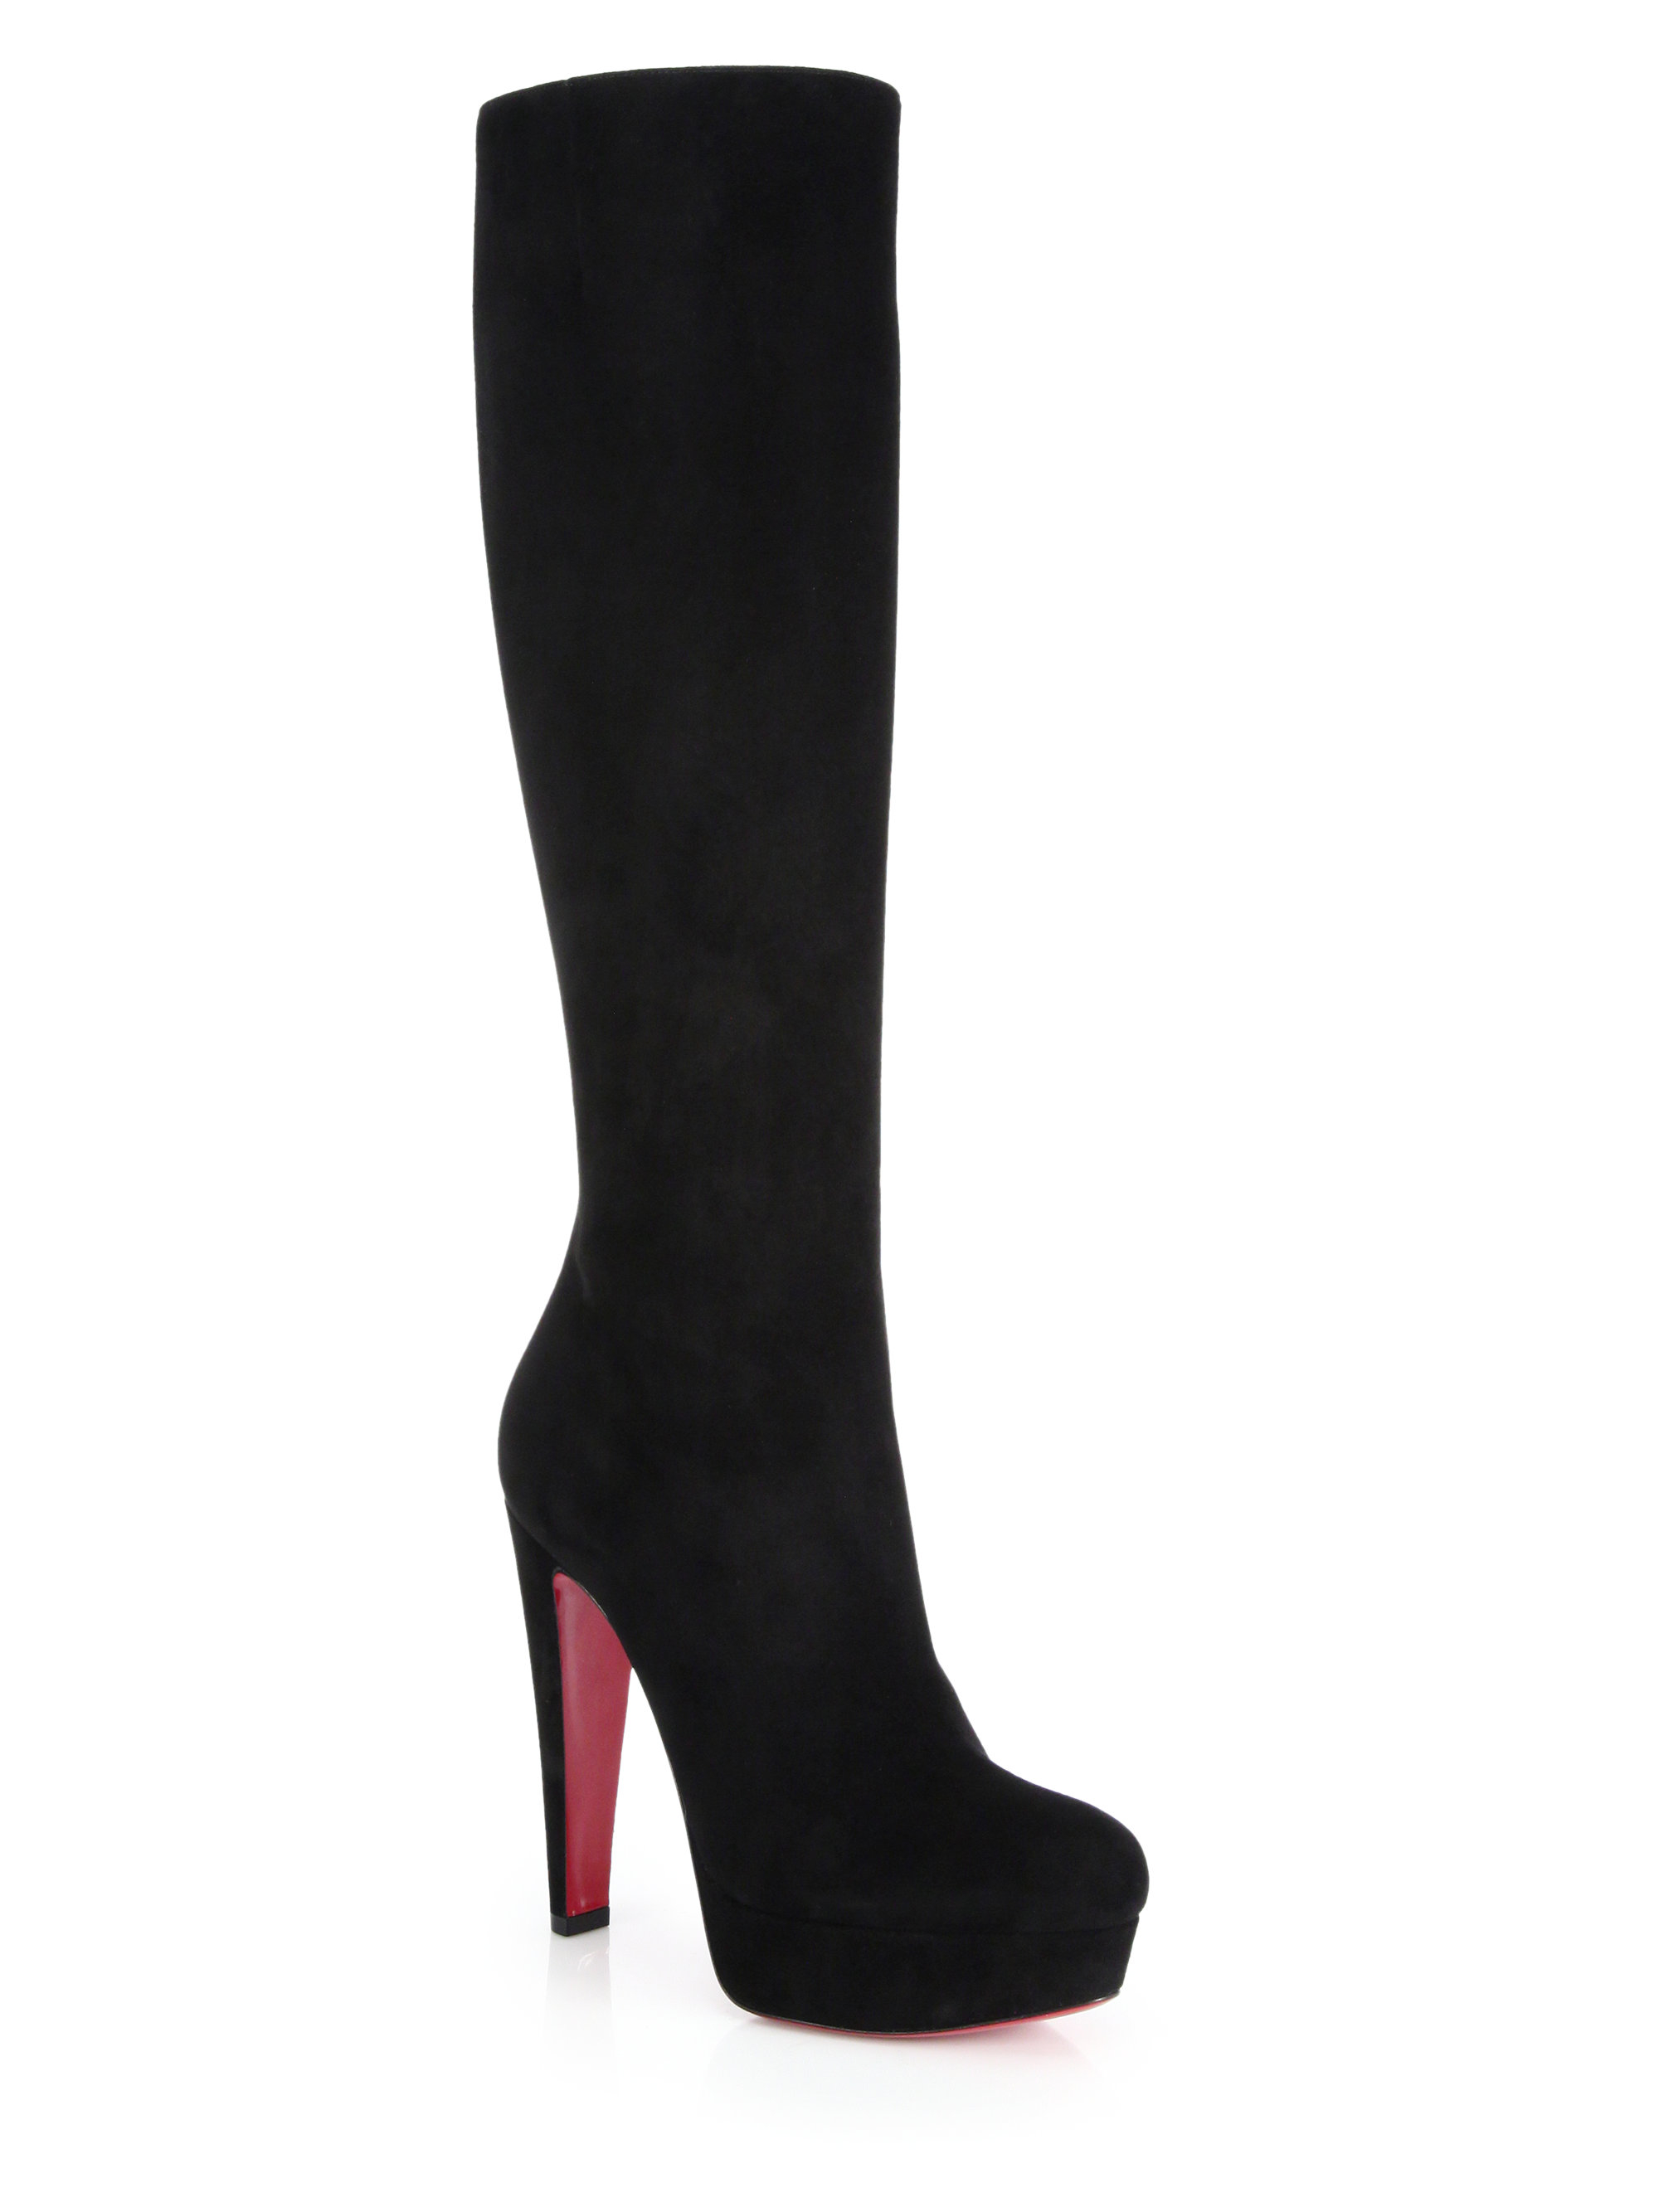 Christian Louboutin Lady Suede Knee-high Platform Boots in Black